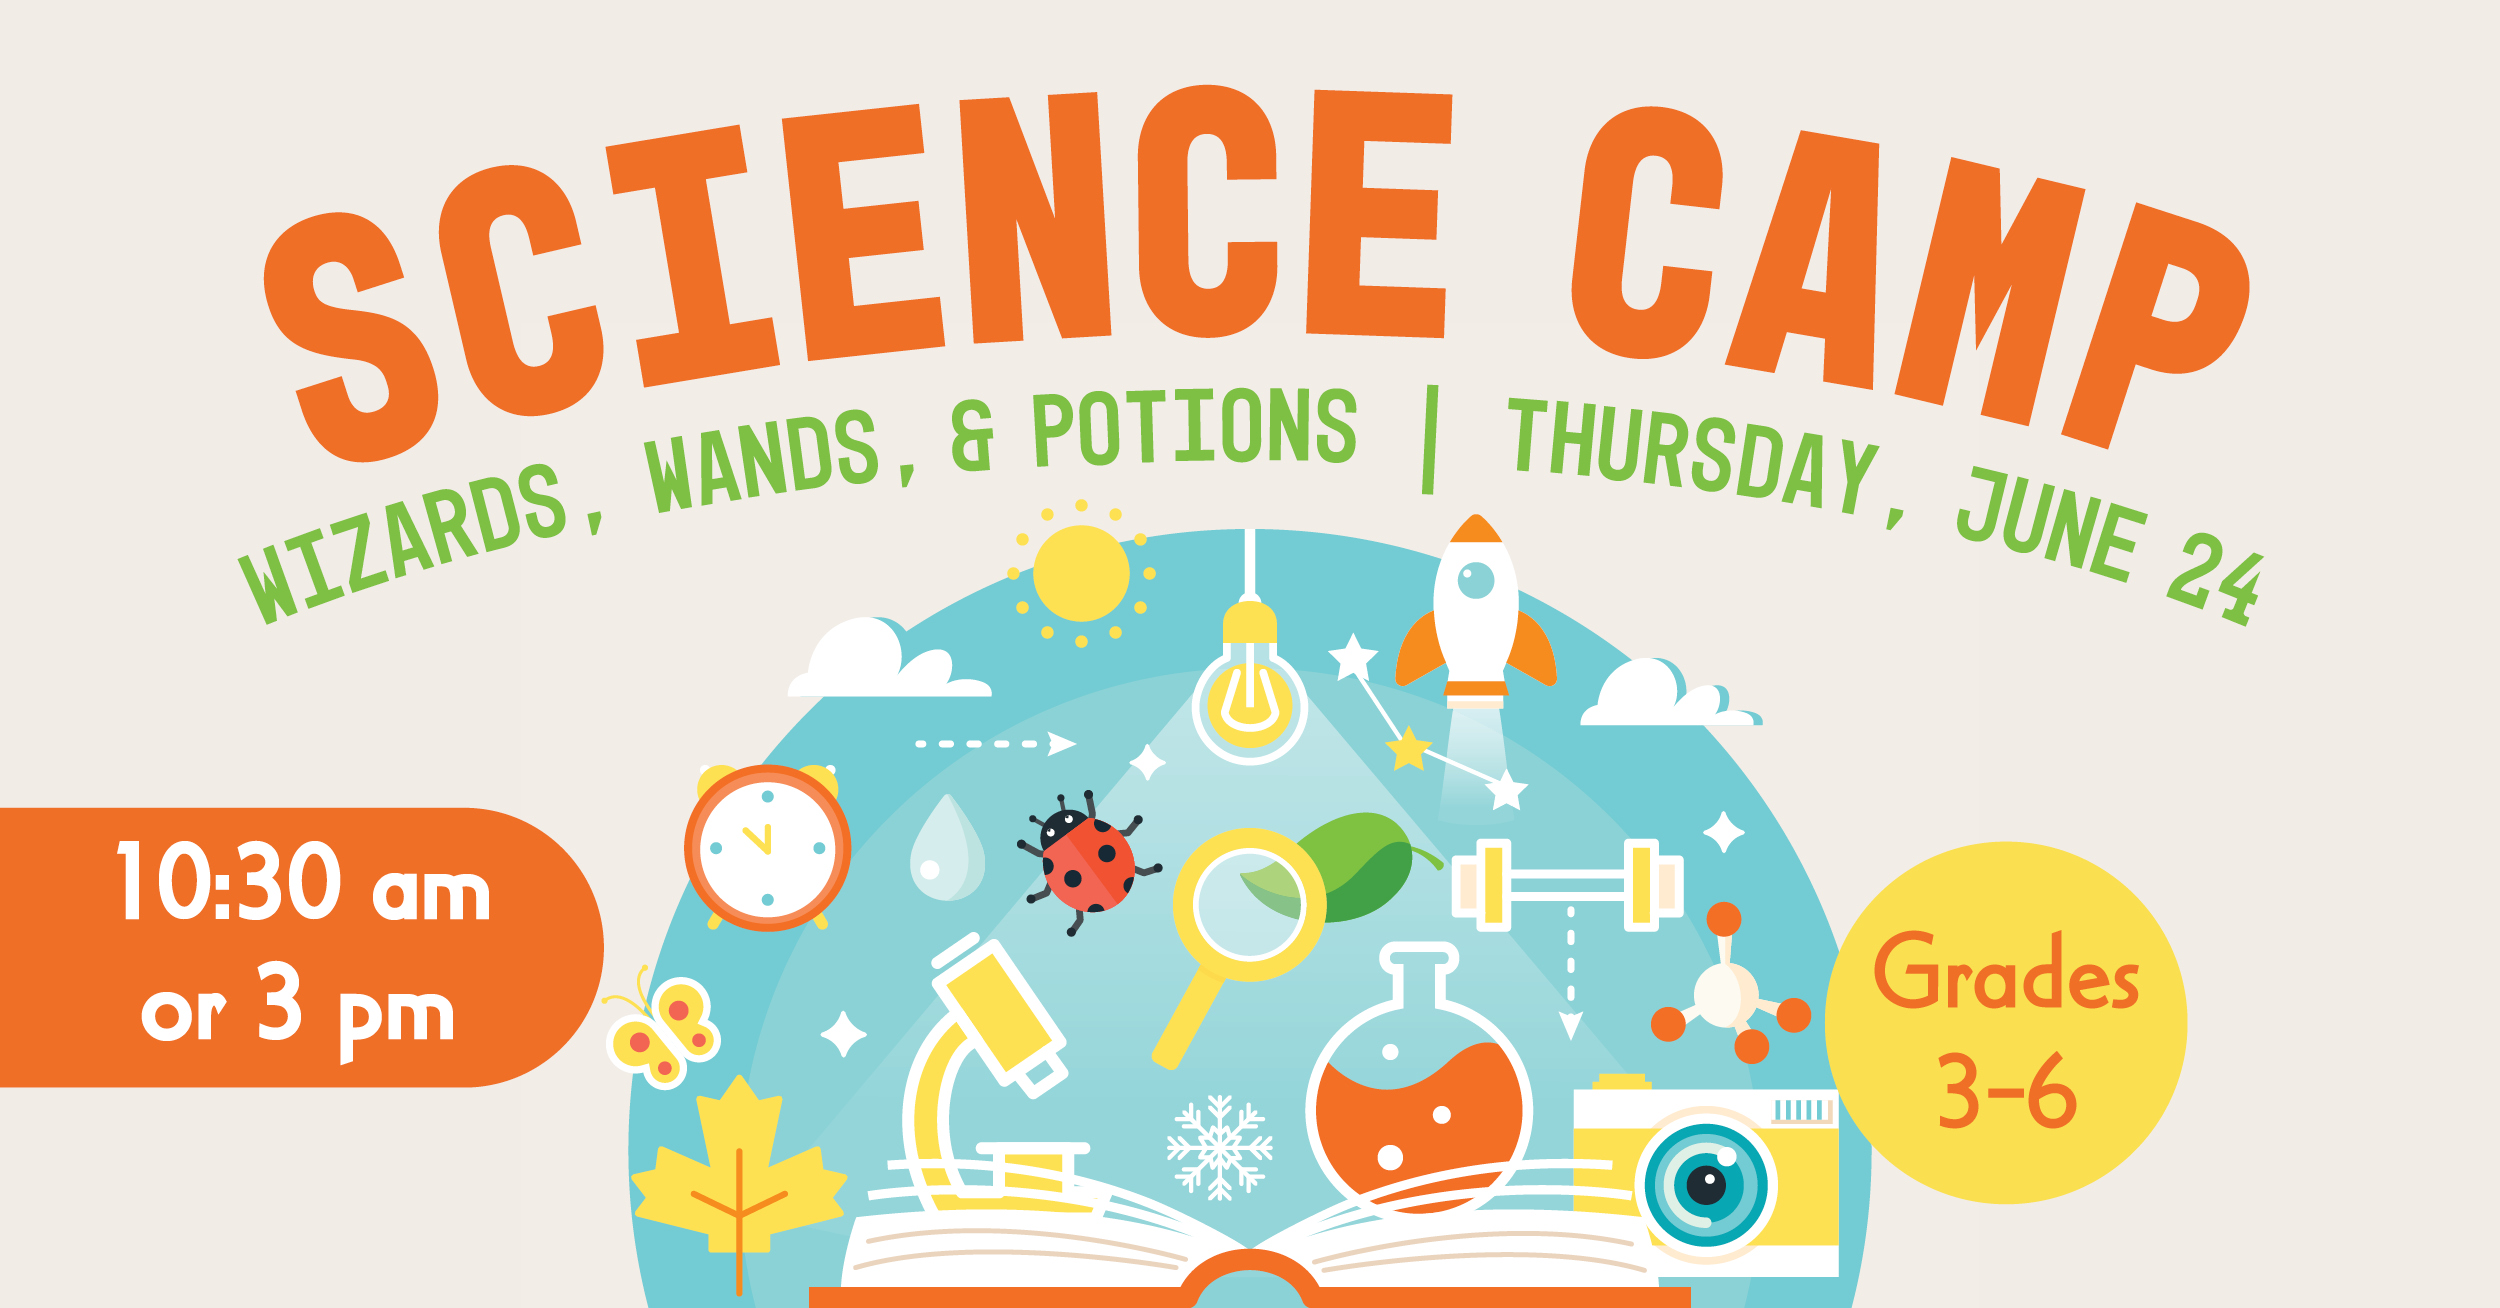 Science Camp: Wizards, Wands, and Potions. Thursday, June 24 10:30am or 3pm. Grades 3 to 6